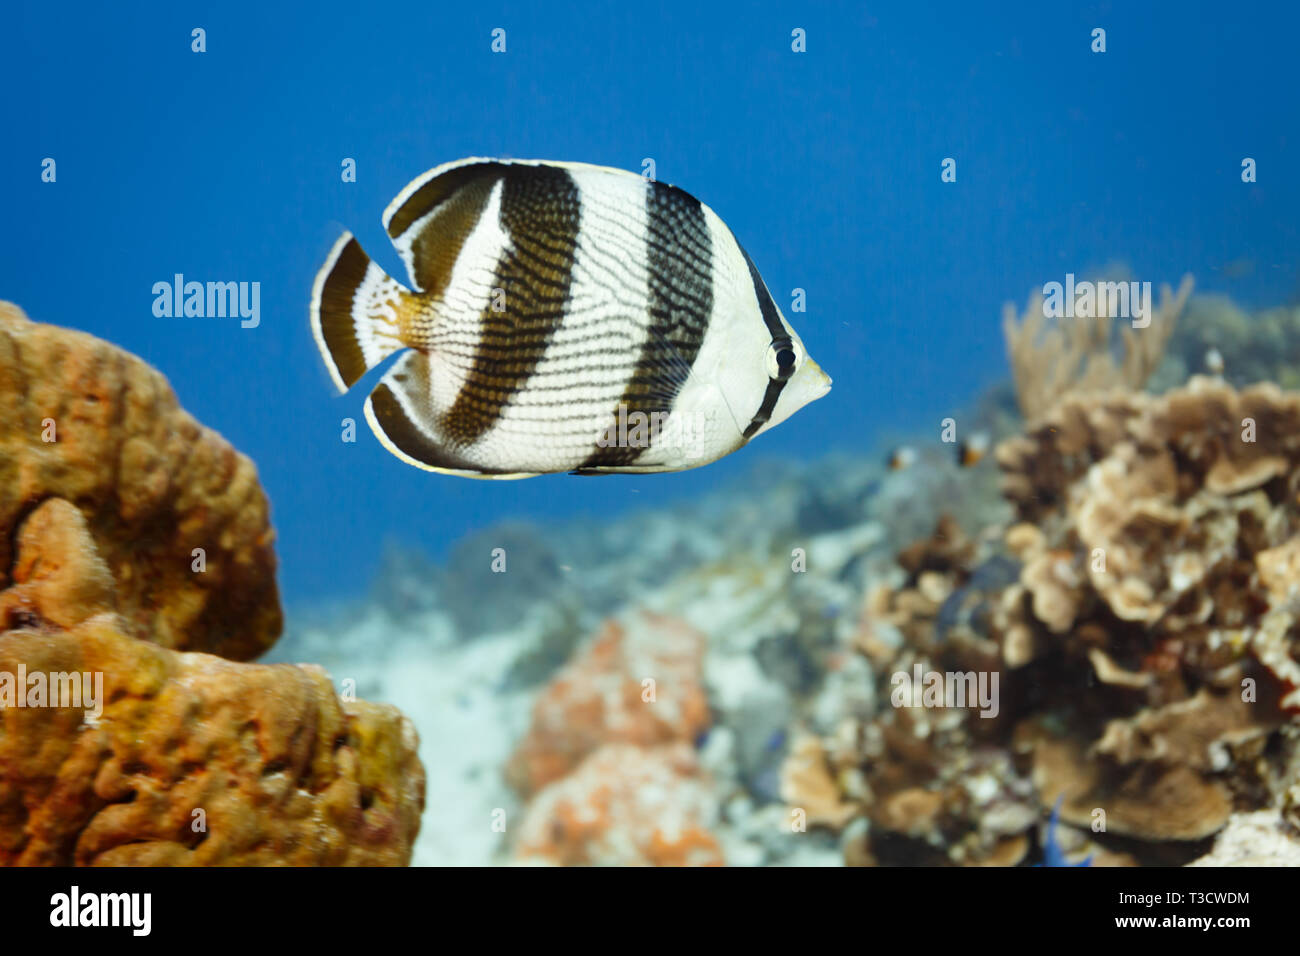 Closeup, Black and white 4 banded butterfly fish, Chaetodon striatus, swims by leathery serpent coral on reef Stock Photo